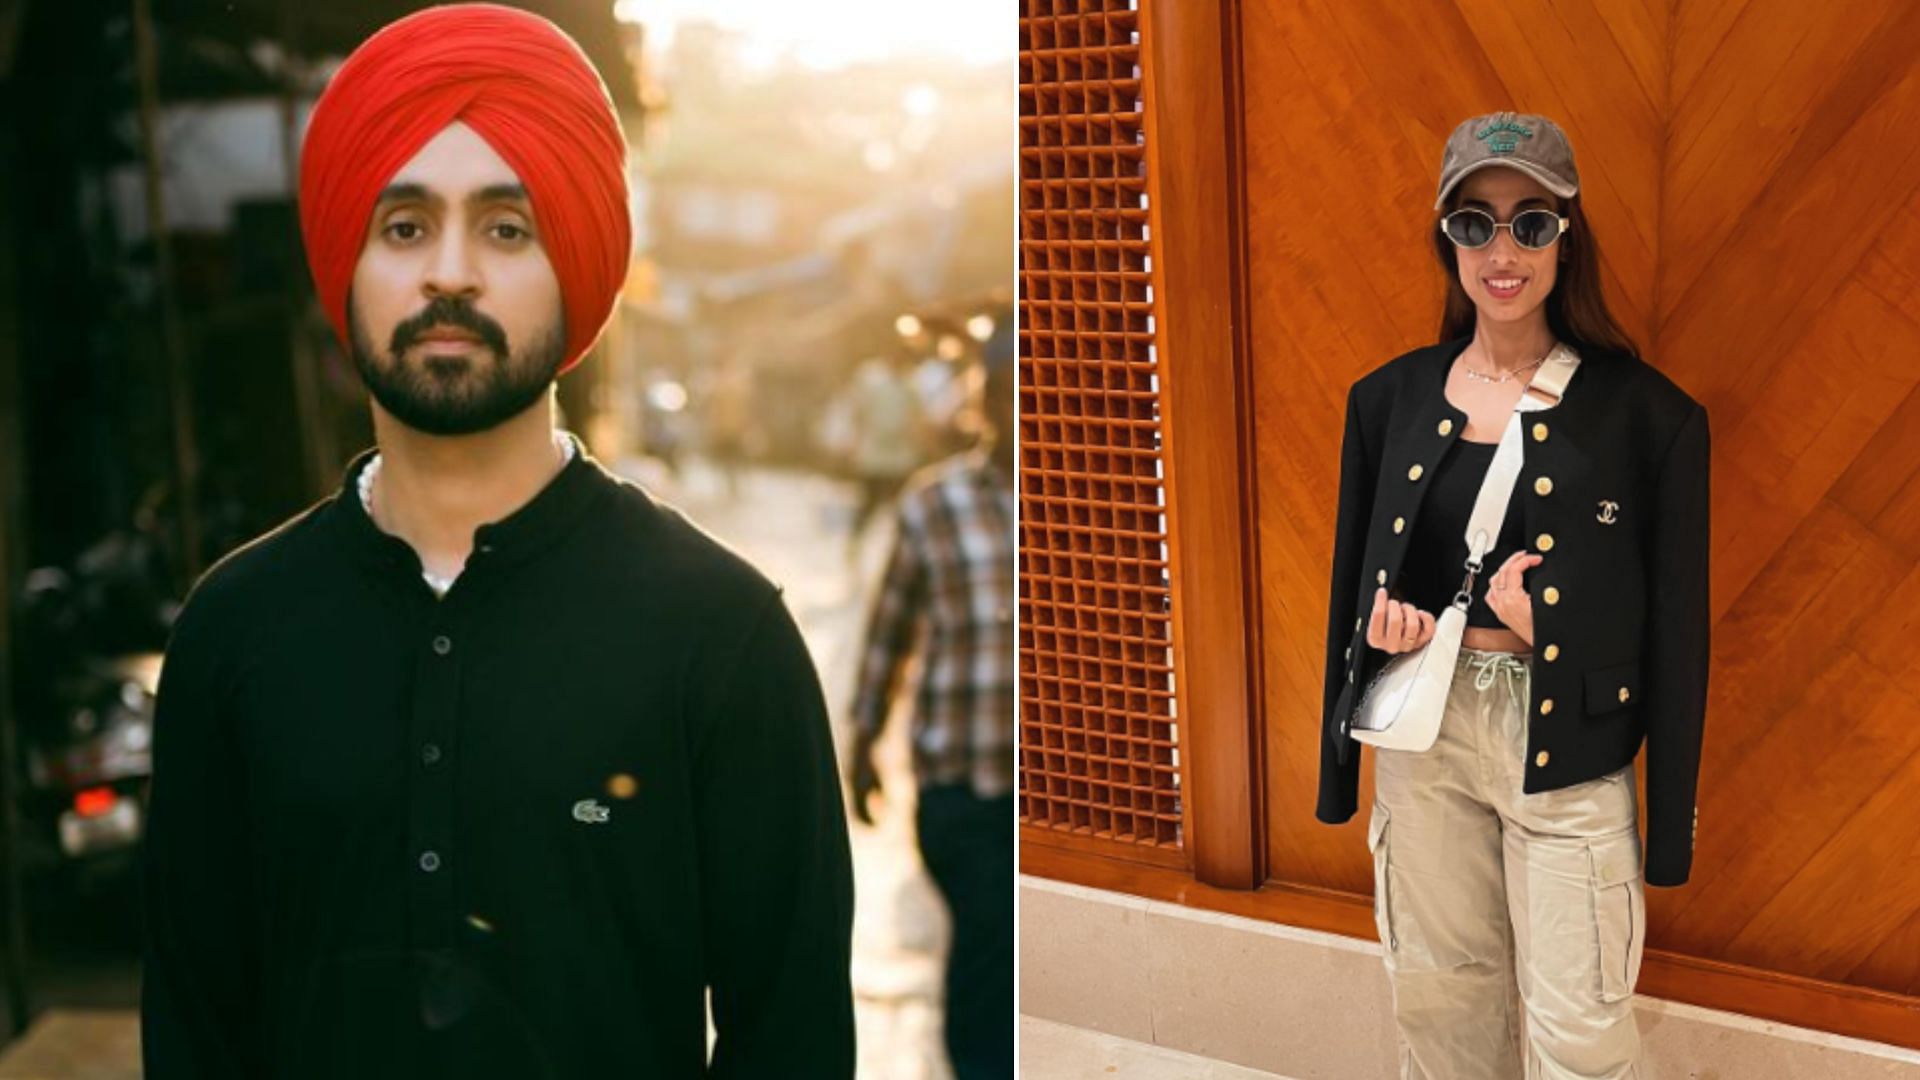 <div class="paragraphs"><p>Diljit Dosanjh gifts his jacket to a fan at Mumbai concert, leaving her overjoyed.</p></div>